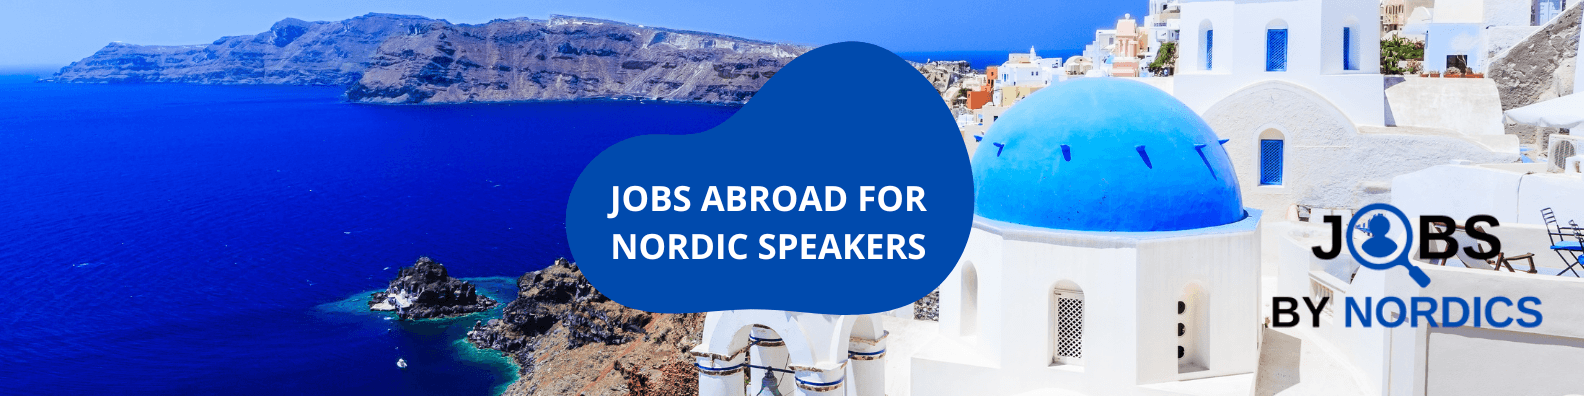 Jobs By Nordics header cover image